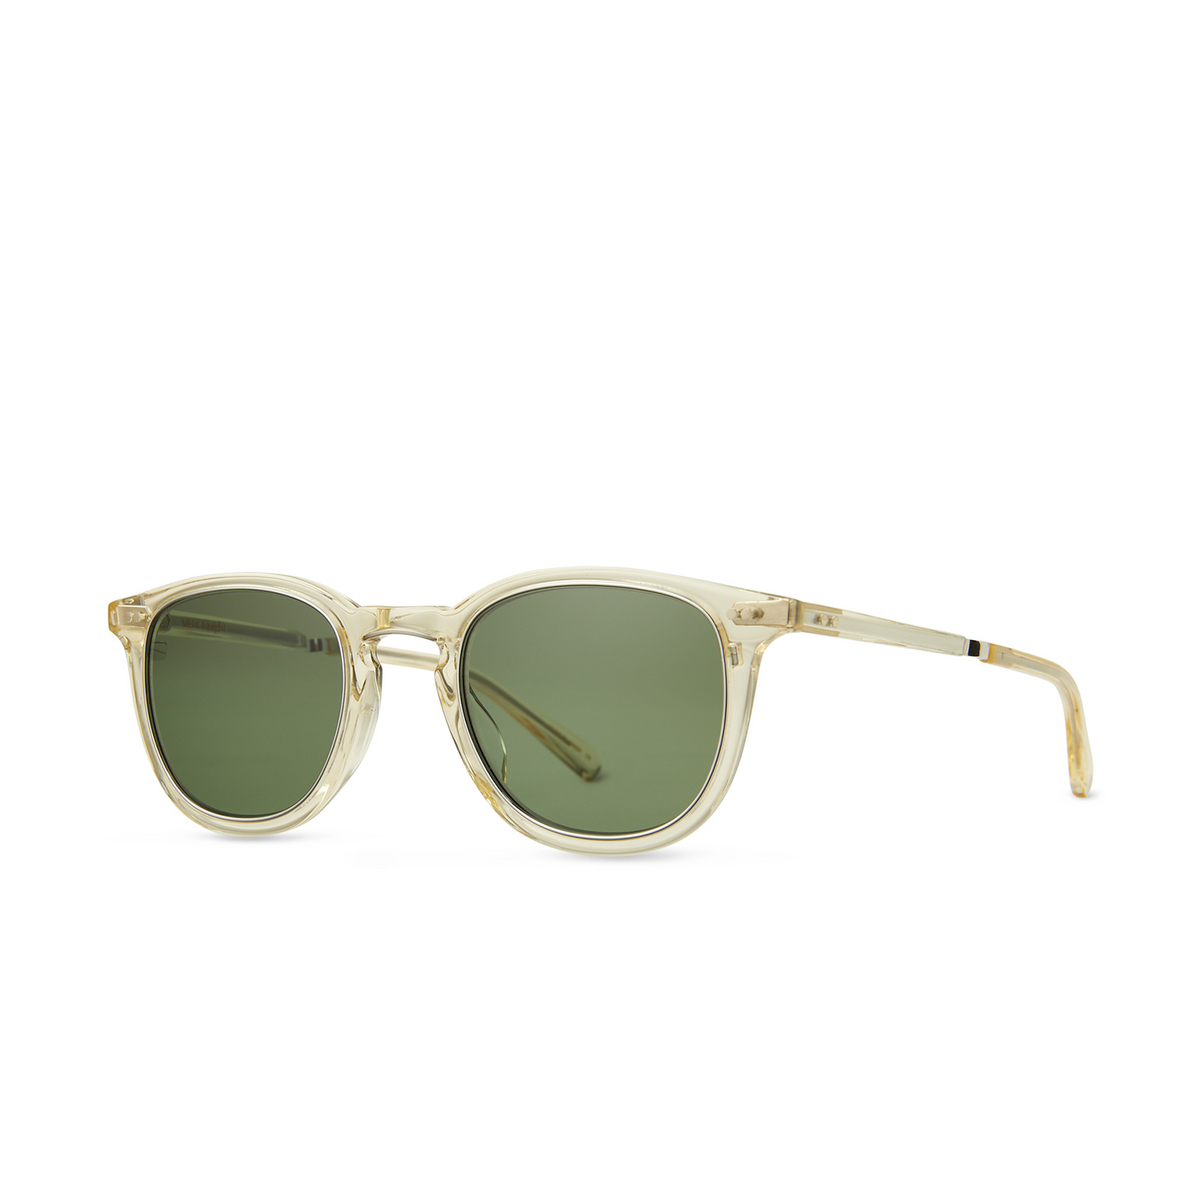 Mr. Leight® Square Sunglasses: Coopers S color Artcry-plt/grn - three-quarters view.